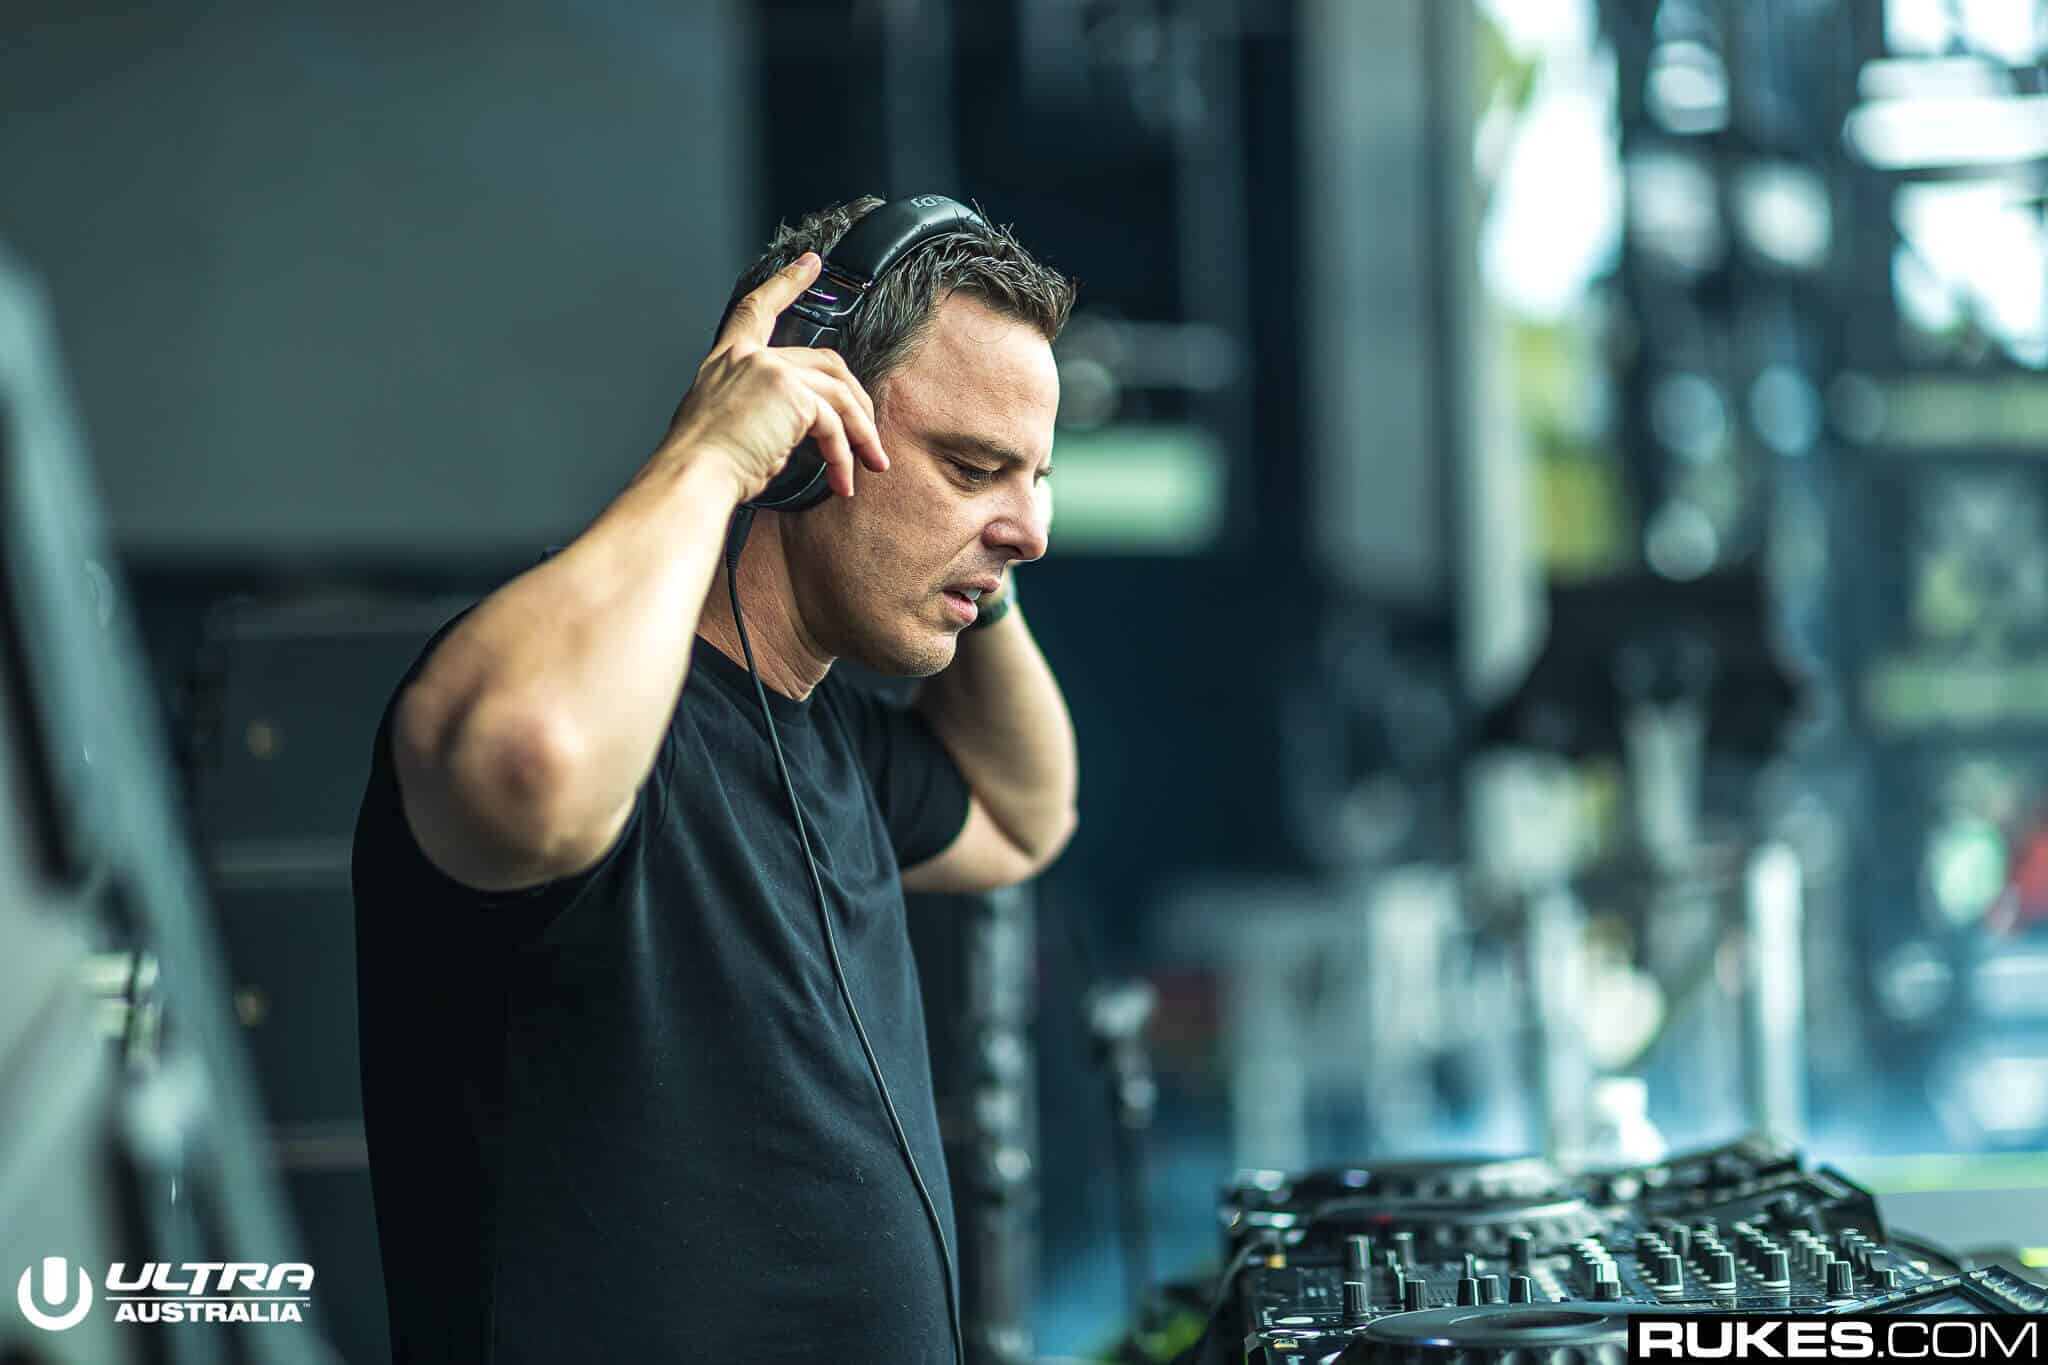 Markus Schulz teams up with Ilan Bluestone and Daniel Wanrooy for masterful, ‘In Search of Sunrise 19’: Listen